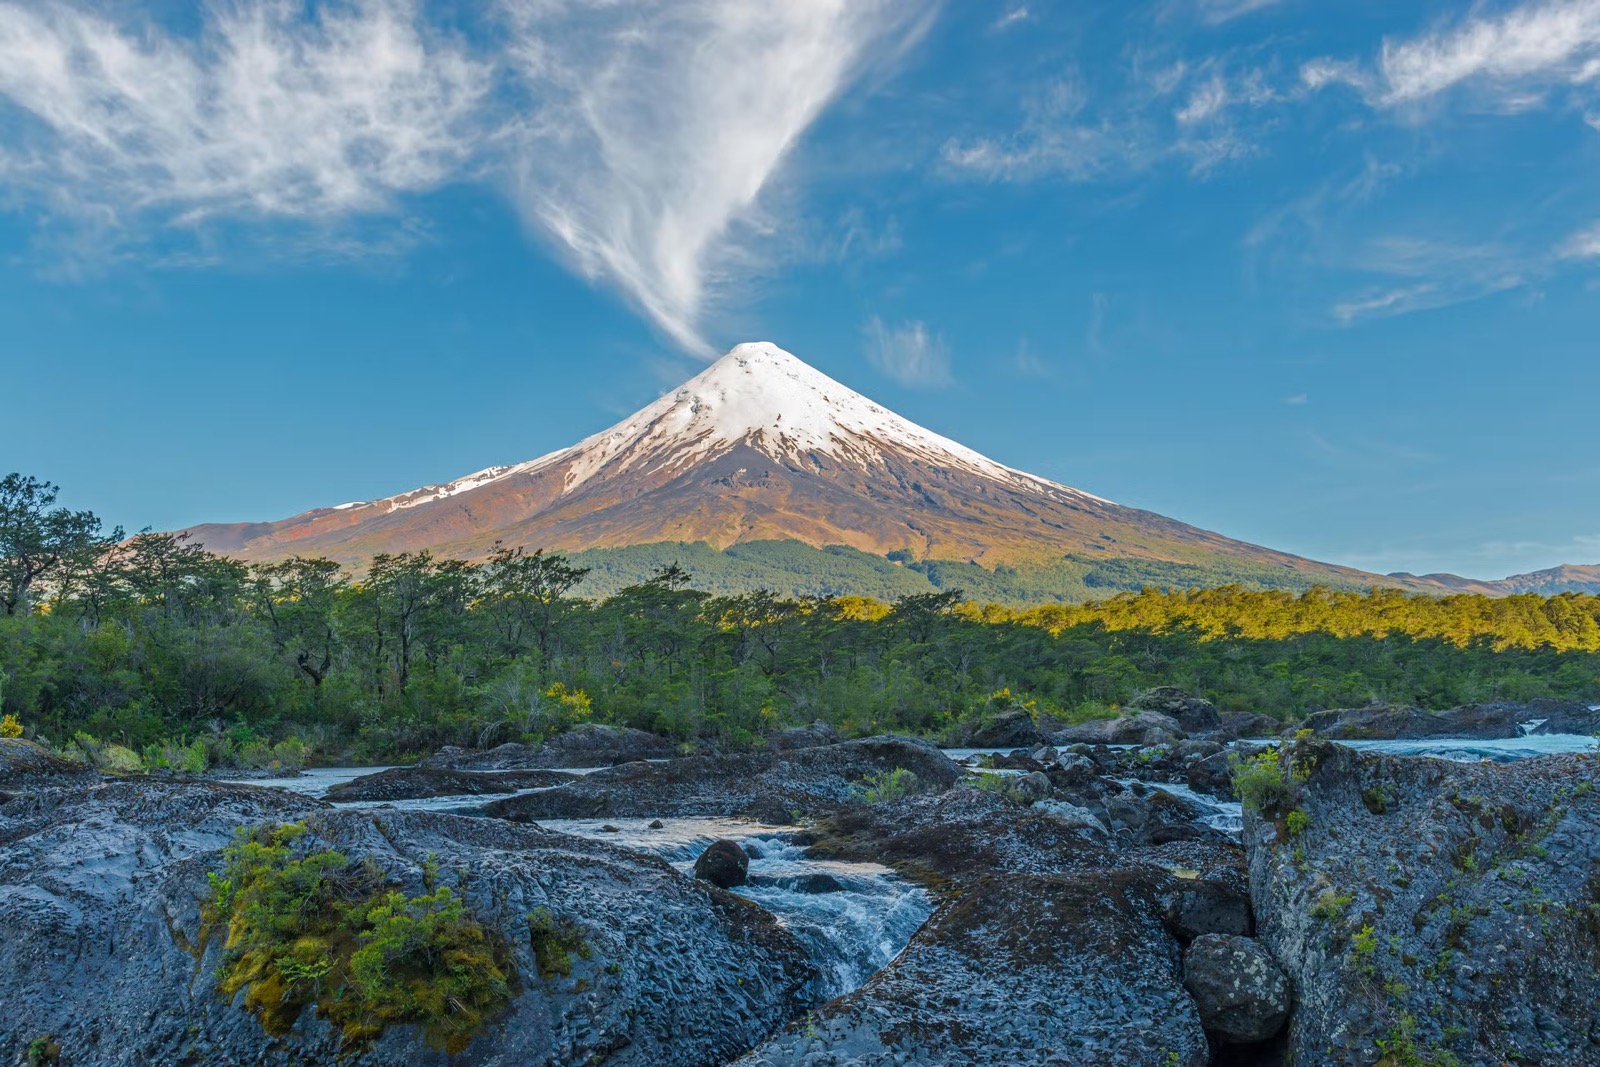 Here Are 24 Glorious Natural Attractions – Can You Match Them to Their Country? Osorno Volcano, Chile